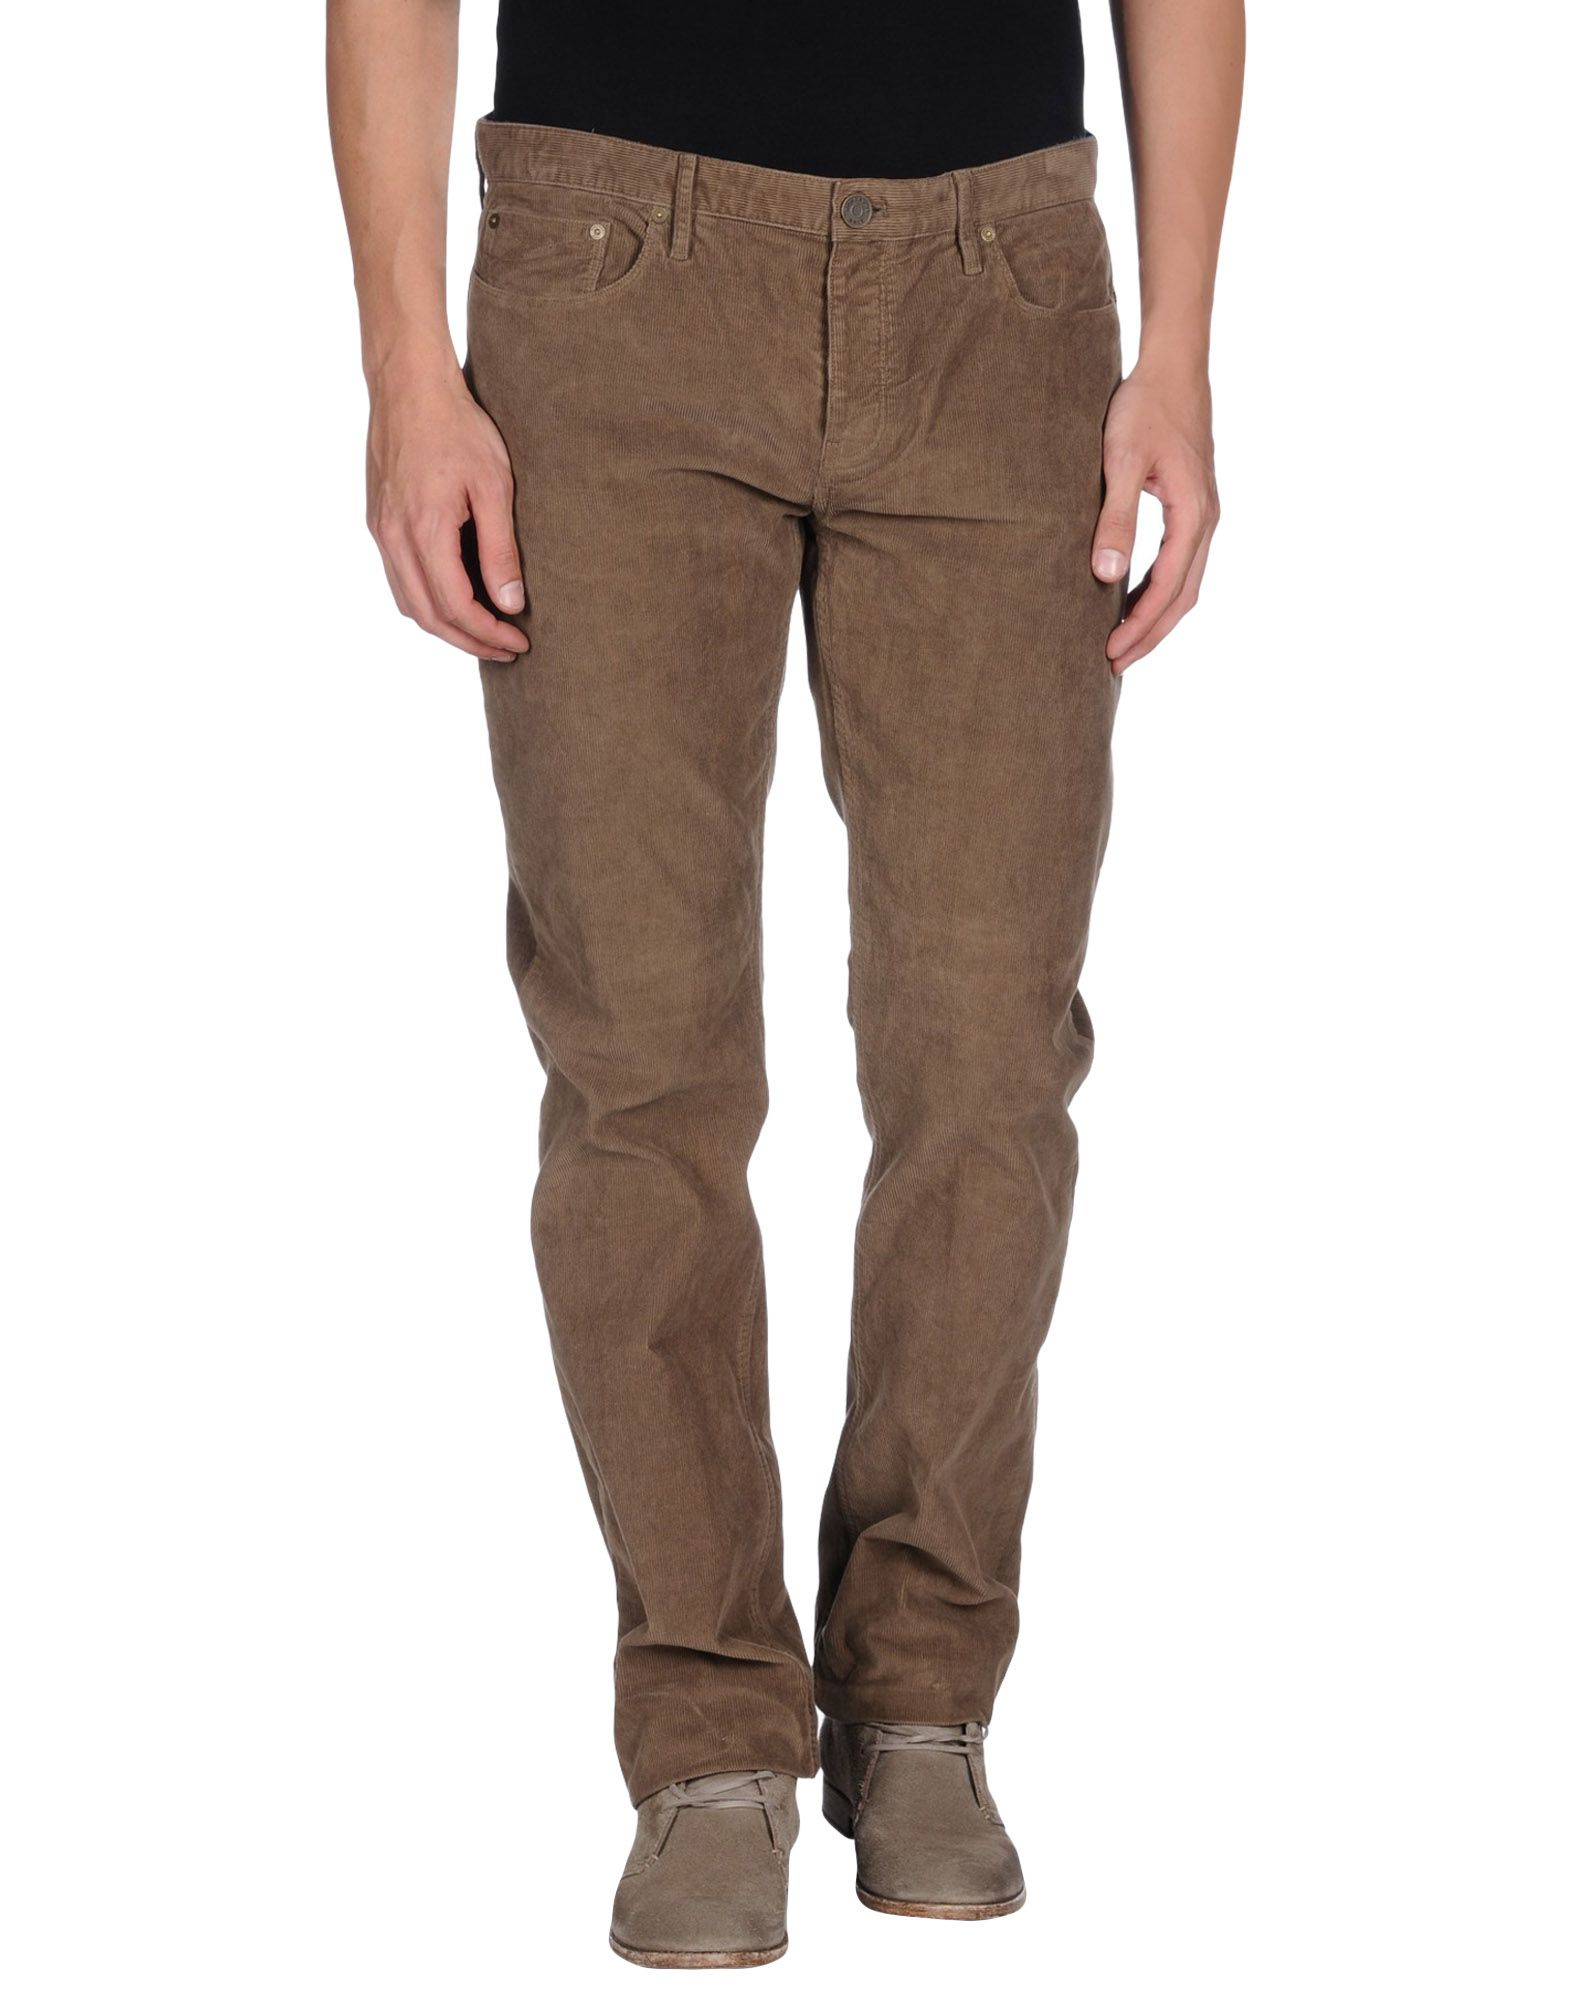 Lyst - Burberry Brit Casual Trouser in Natural for Men